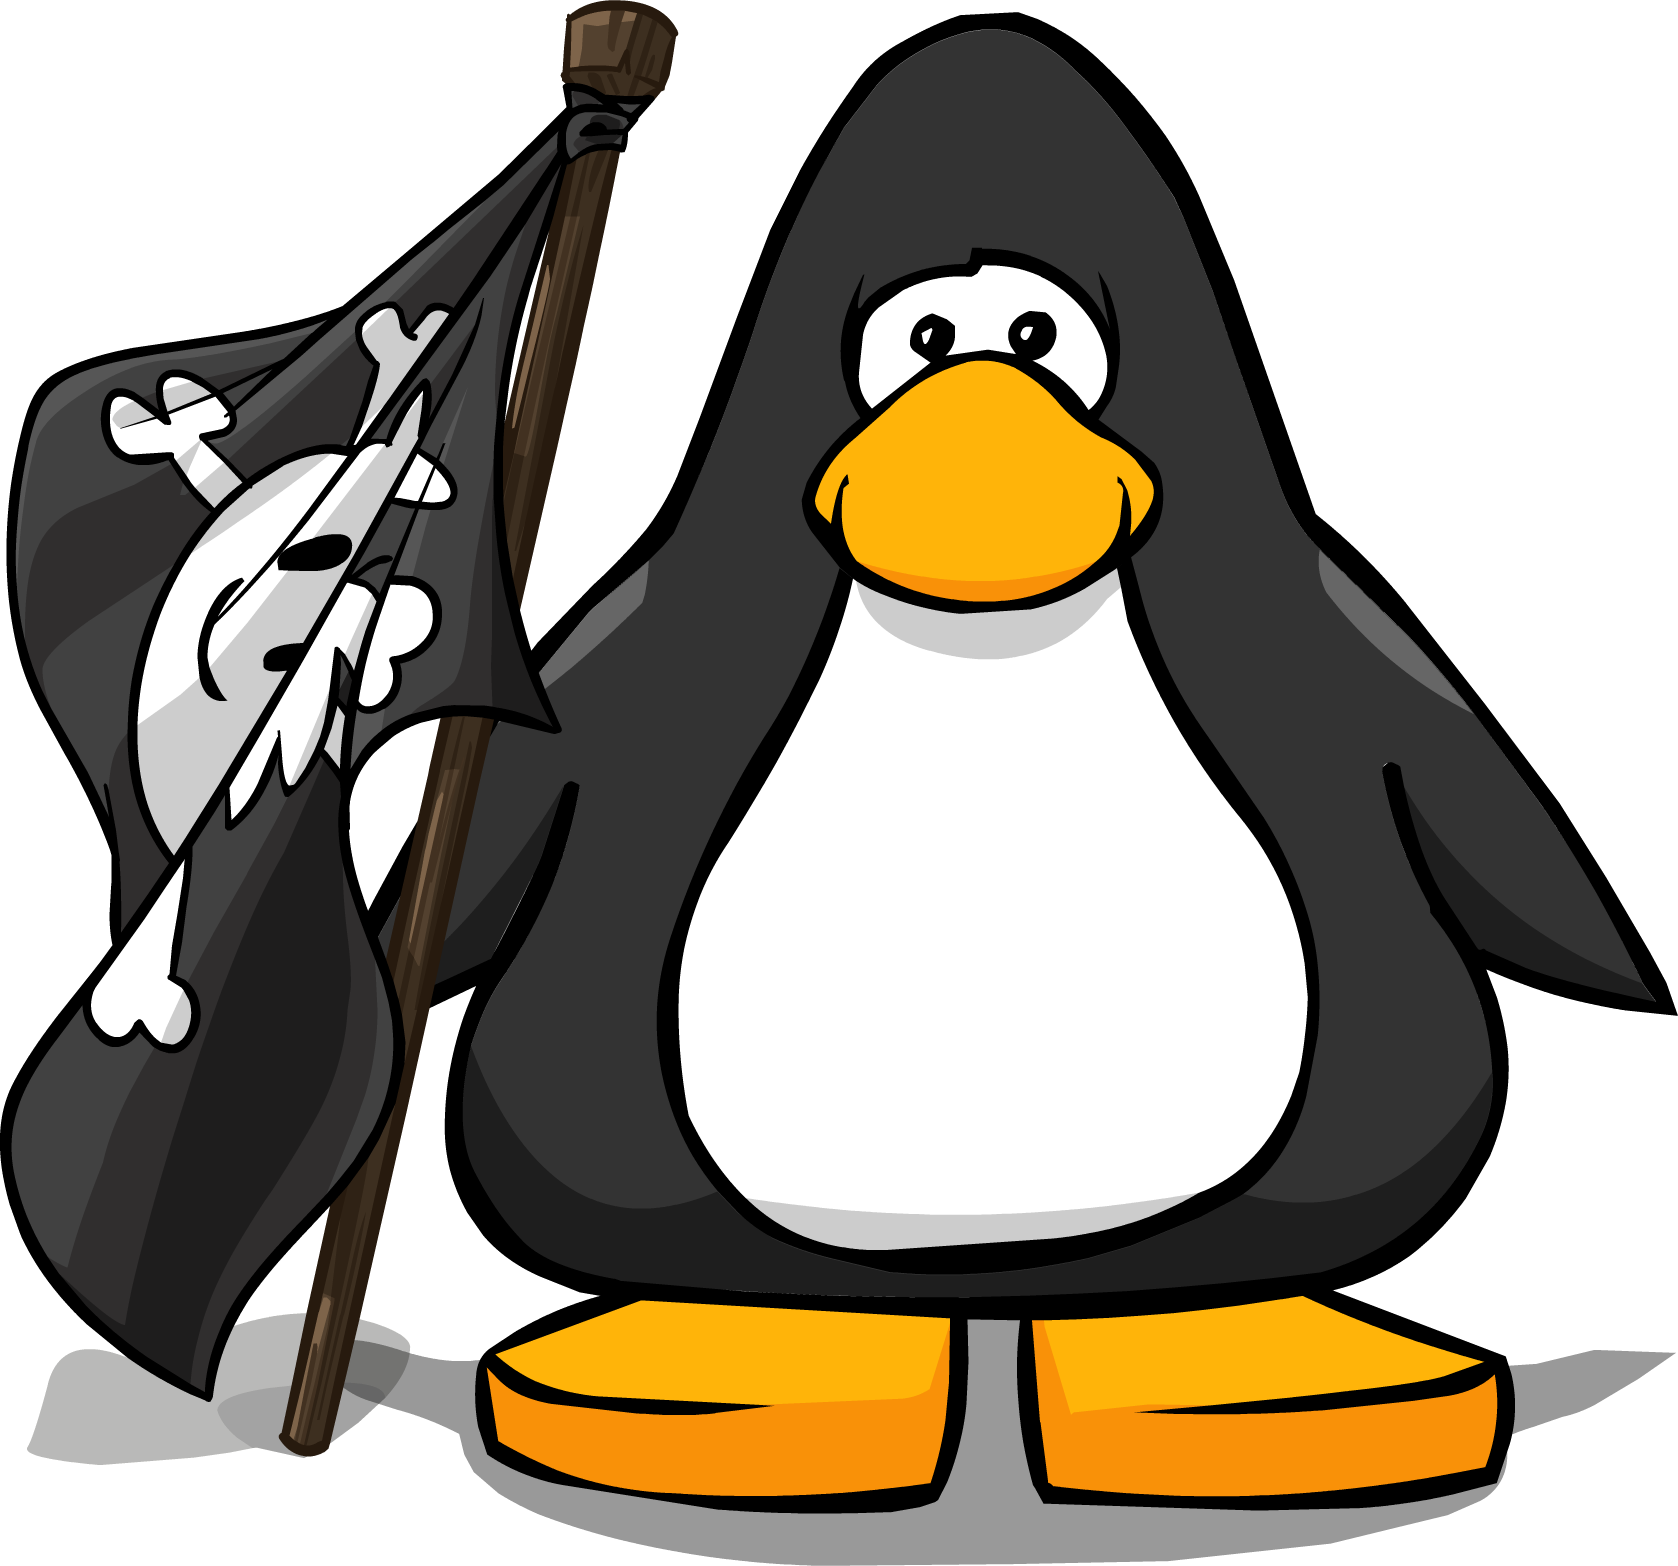 Pirate Flag On A Player Card - Club Penguin The Popstar (1678x1566)